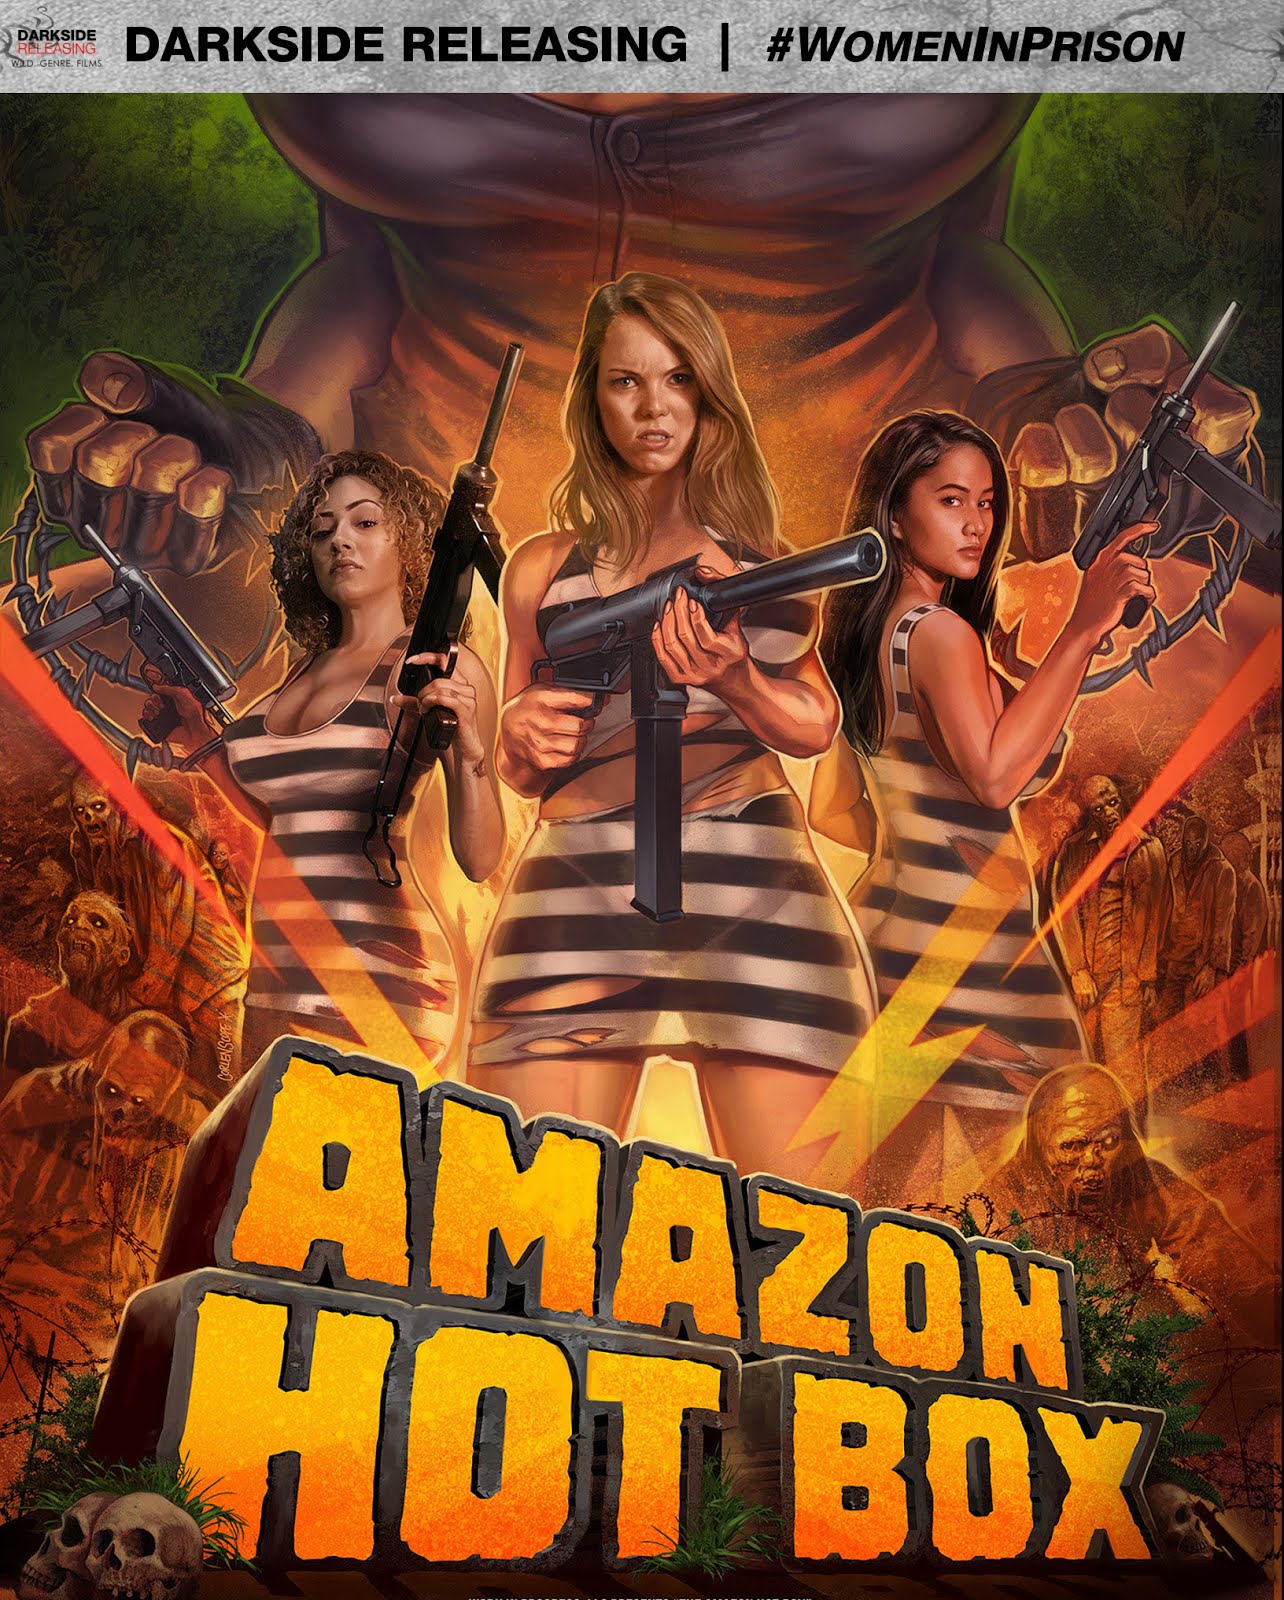 AMAZON HOT BOX - out now on Blu-ray!